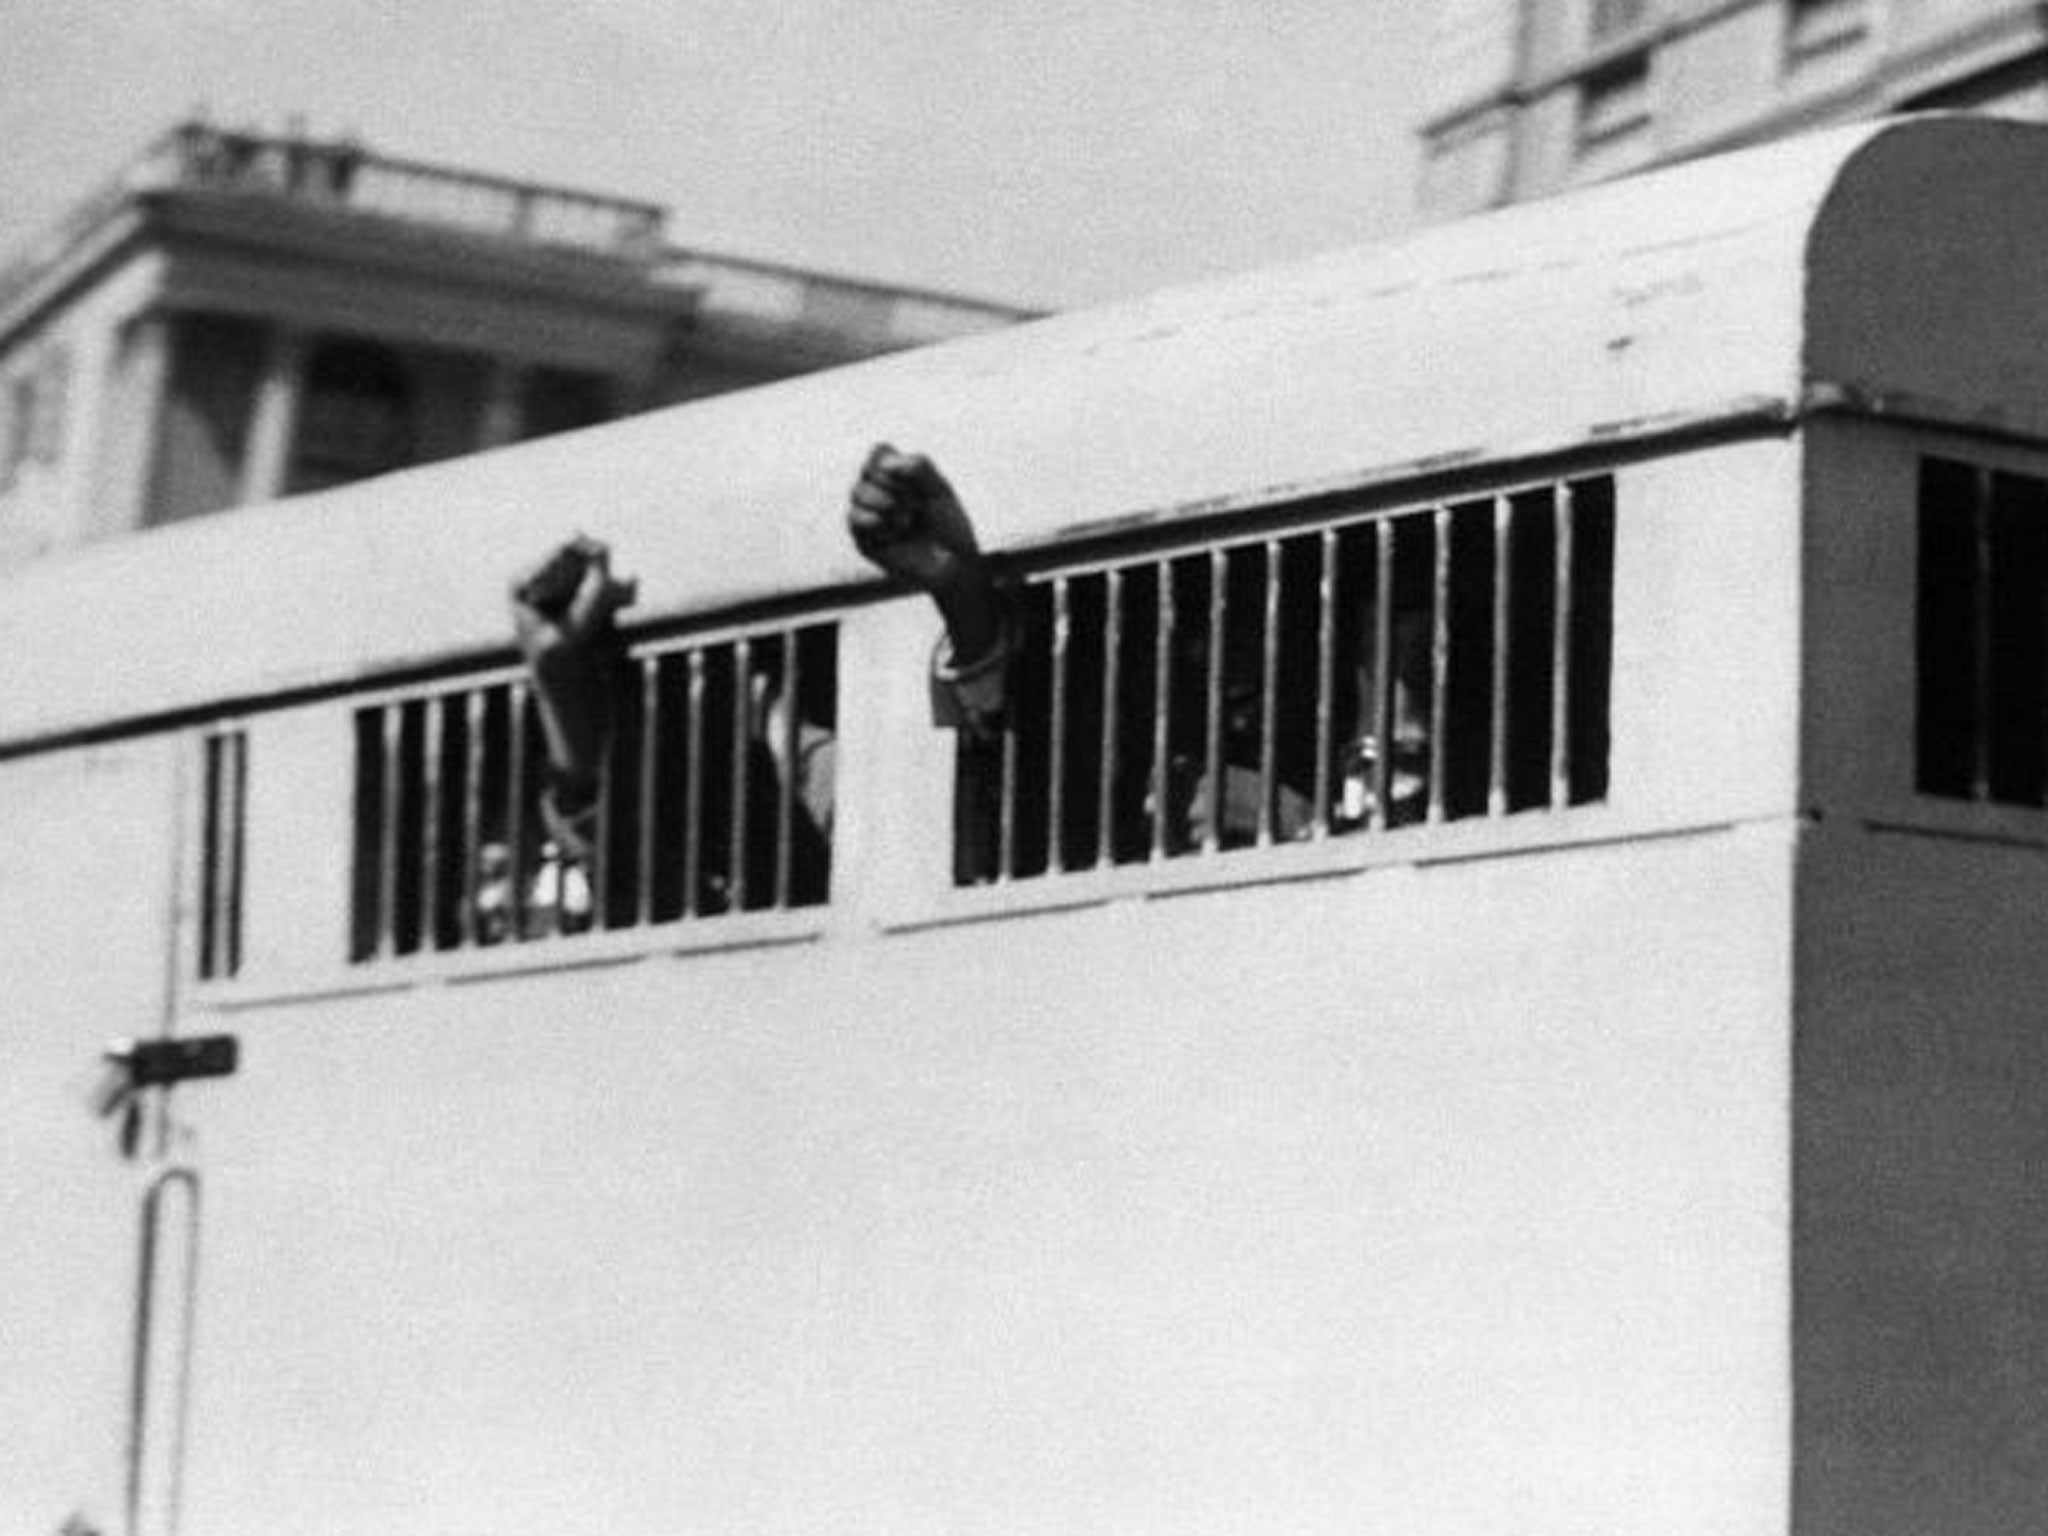 The iconic image taken in 1964 as Mandela was sent to prison